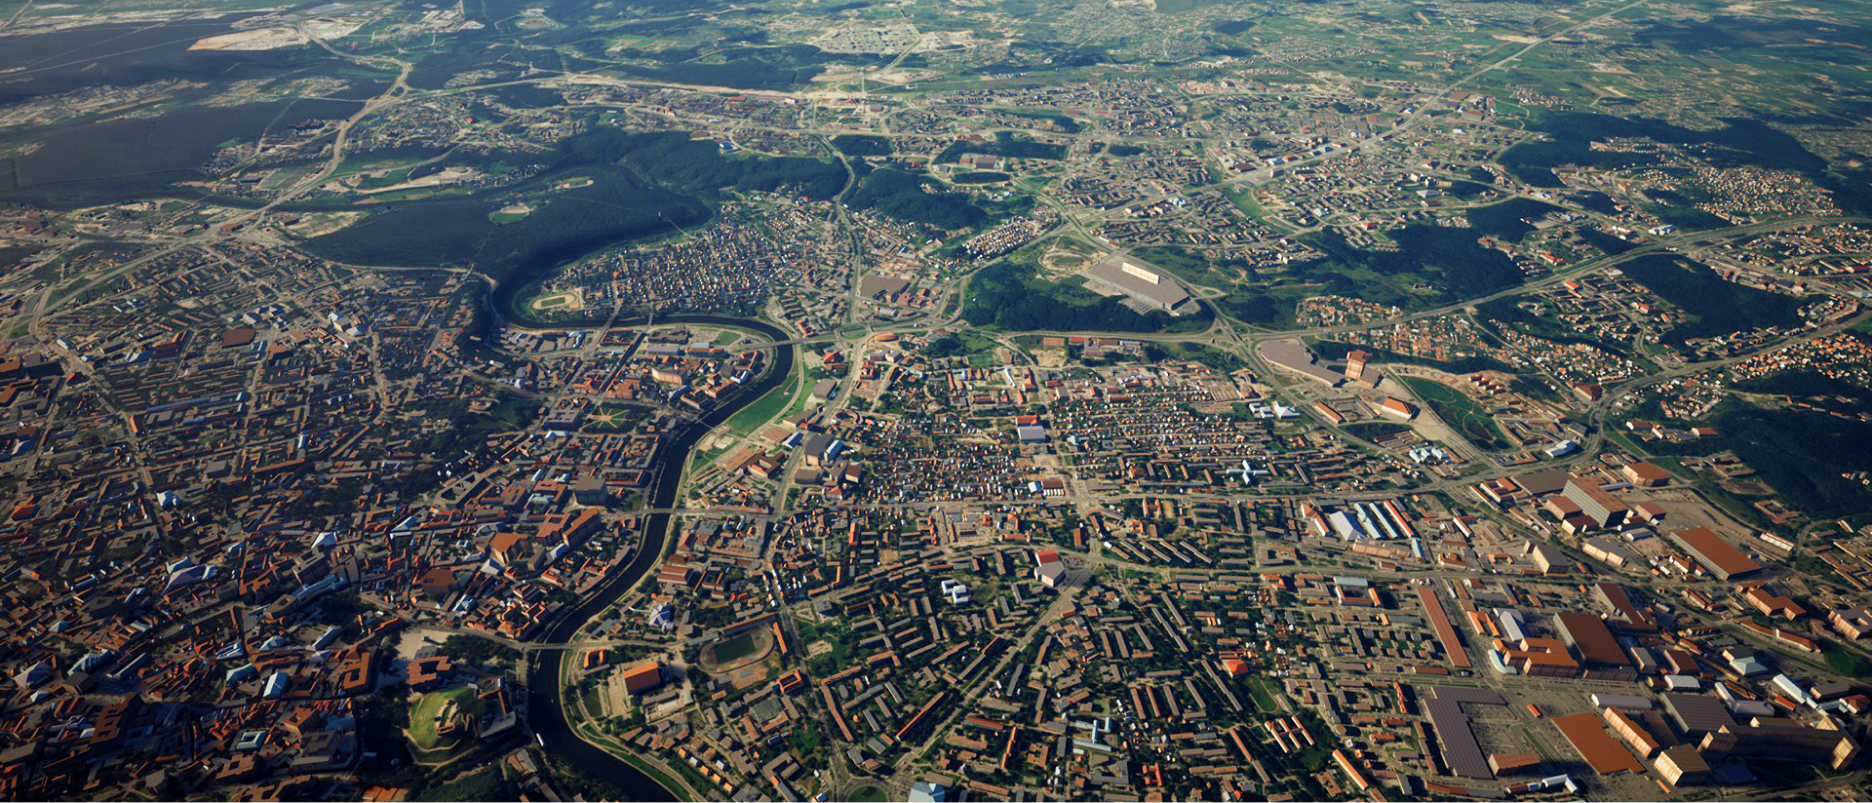 An aerial view of an expanse of developed land with a river snaking through